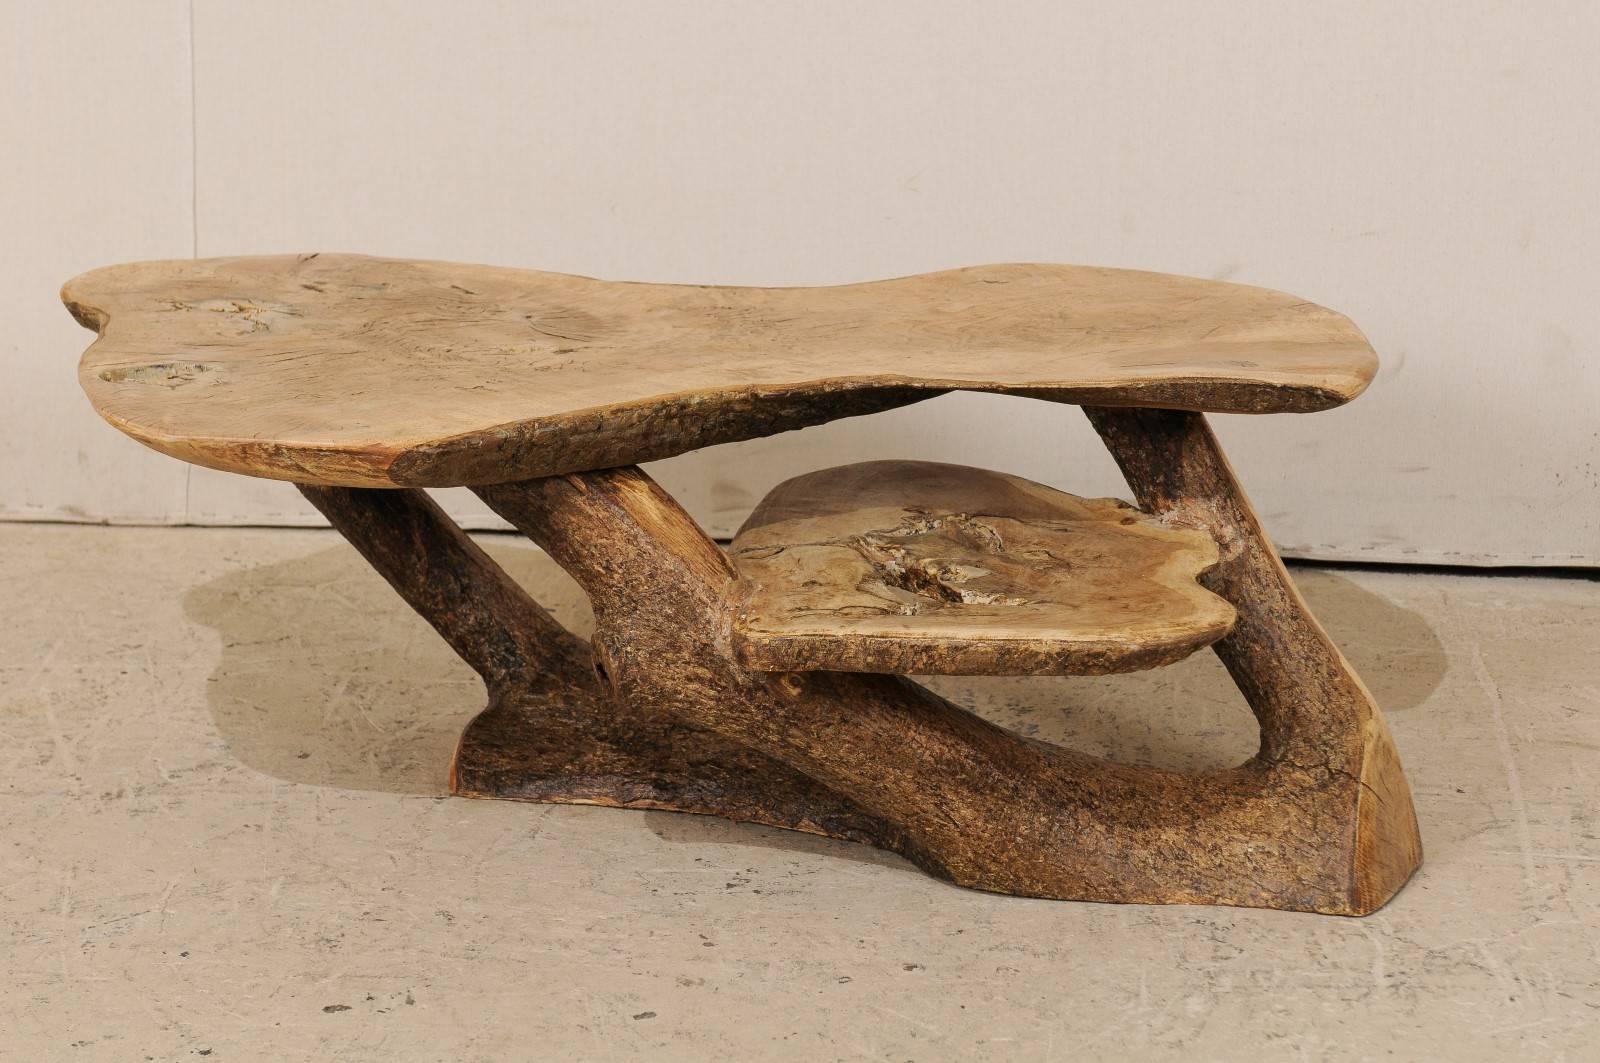 A Spanish two-level cypress wood coffee table. This unique Spanish natural wood table has been made from the slab and branches of the Mediterranean cypress tree. The top has a lovely, almost hour glass shape. There is a second level which juts out